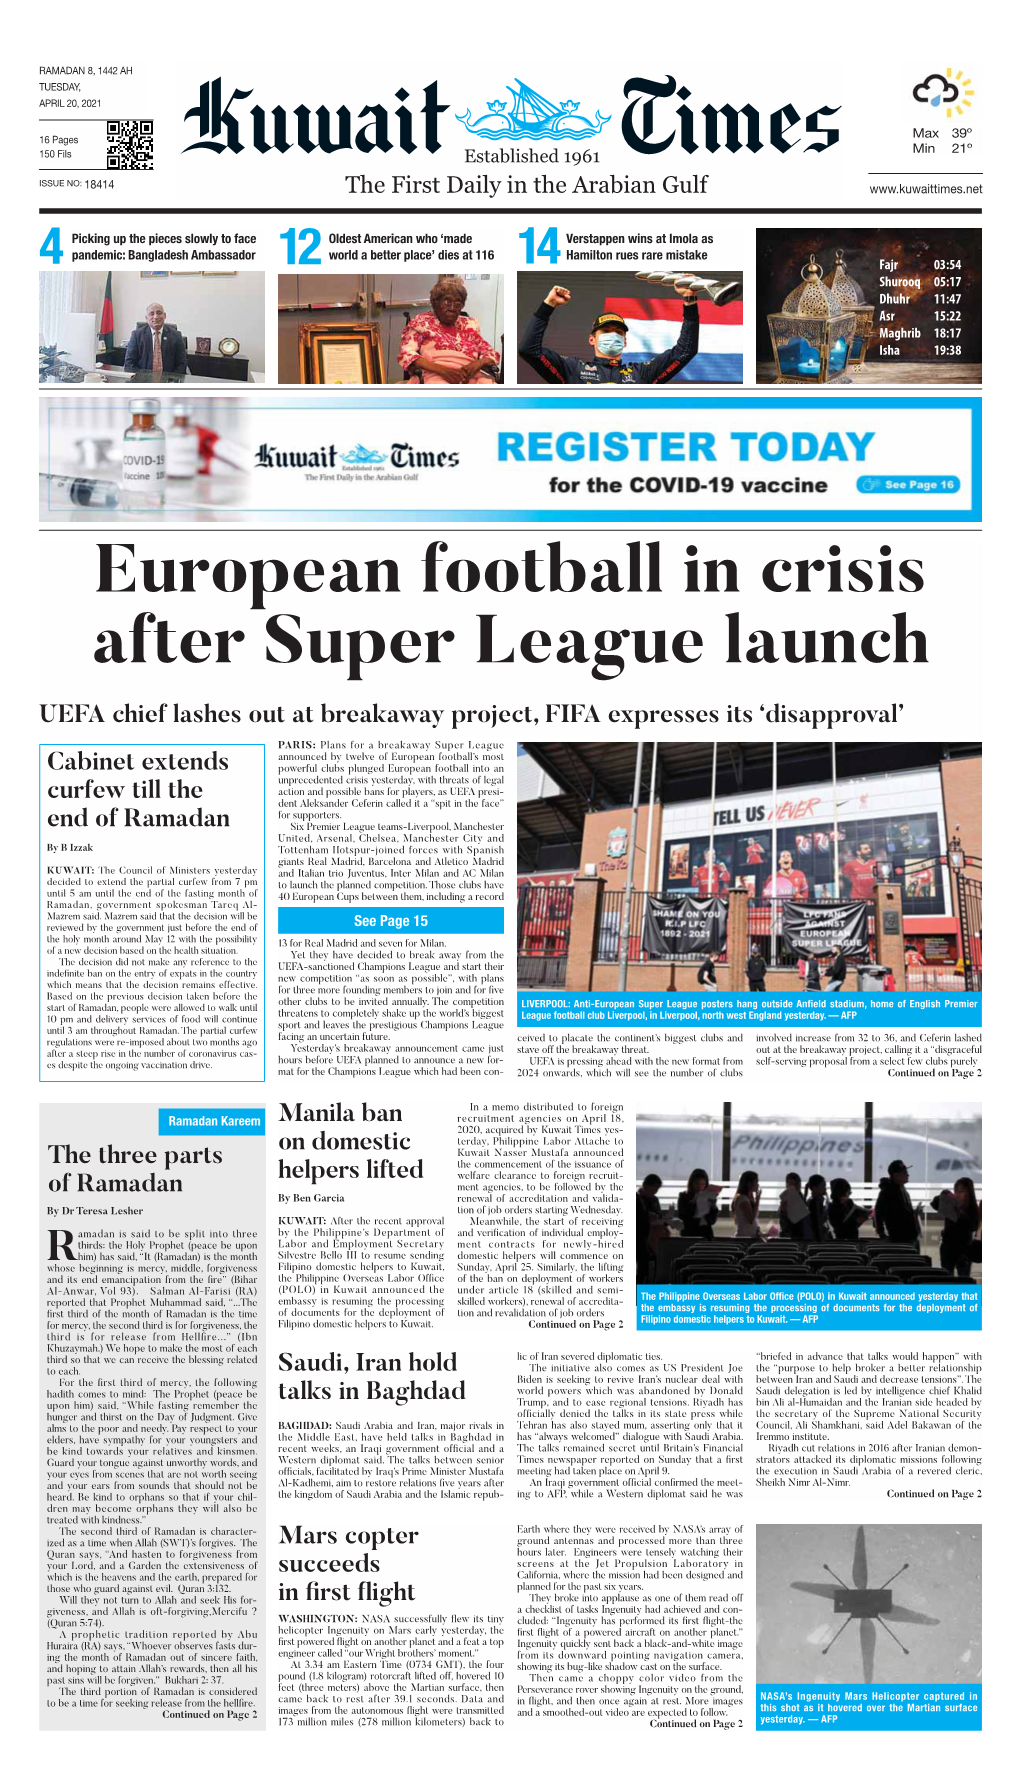 European Football in Crisis After Super League Launch UEFA Chief Lashes out at Breakaway Project, FIFA Expresses Its ‘Disapproval’